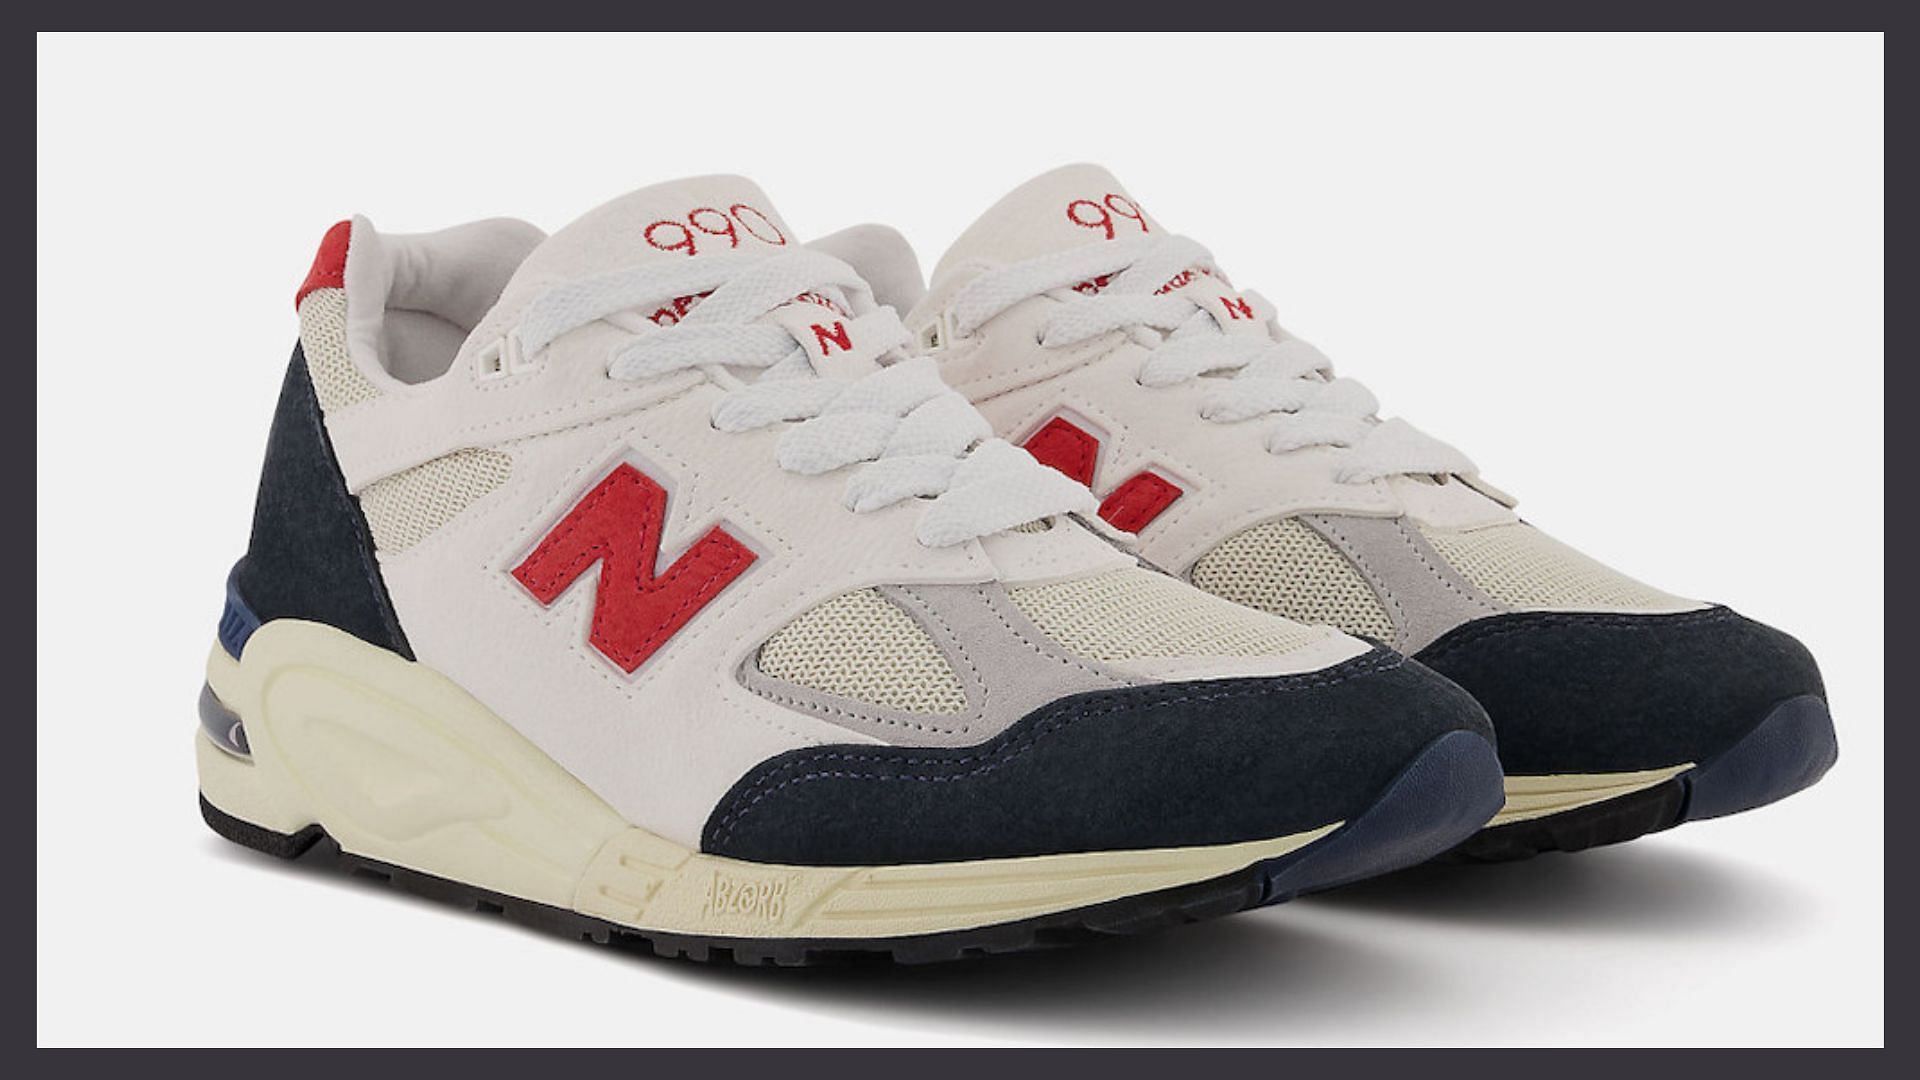 Conquista comercio sarcoma Where to buy New Balance 990v2 Made in USA shoes? Price, release date, and  more details explored